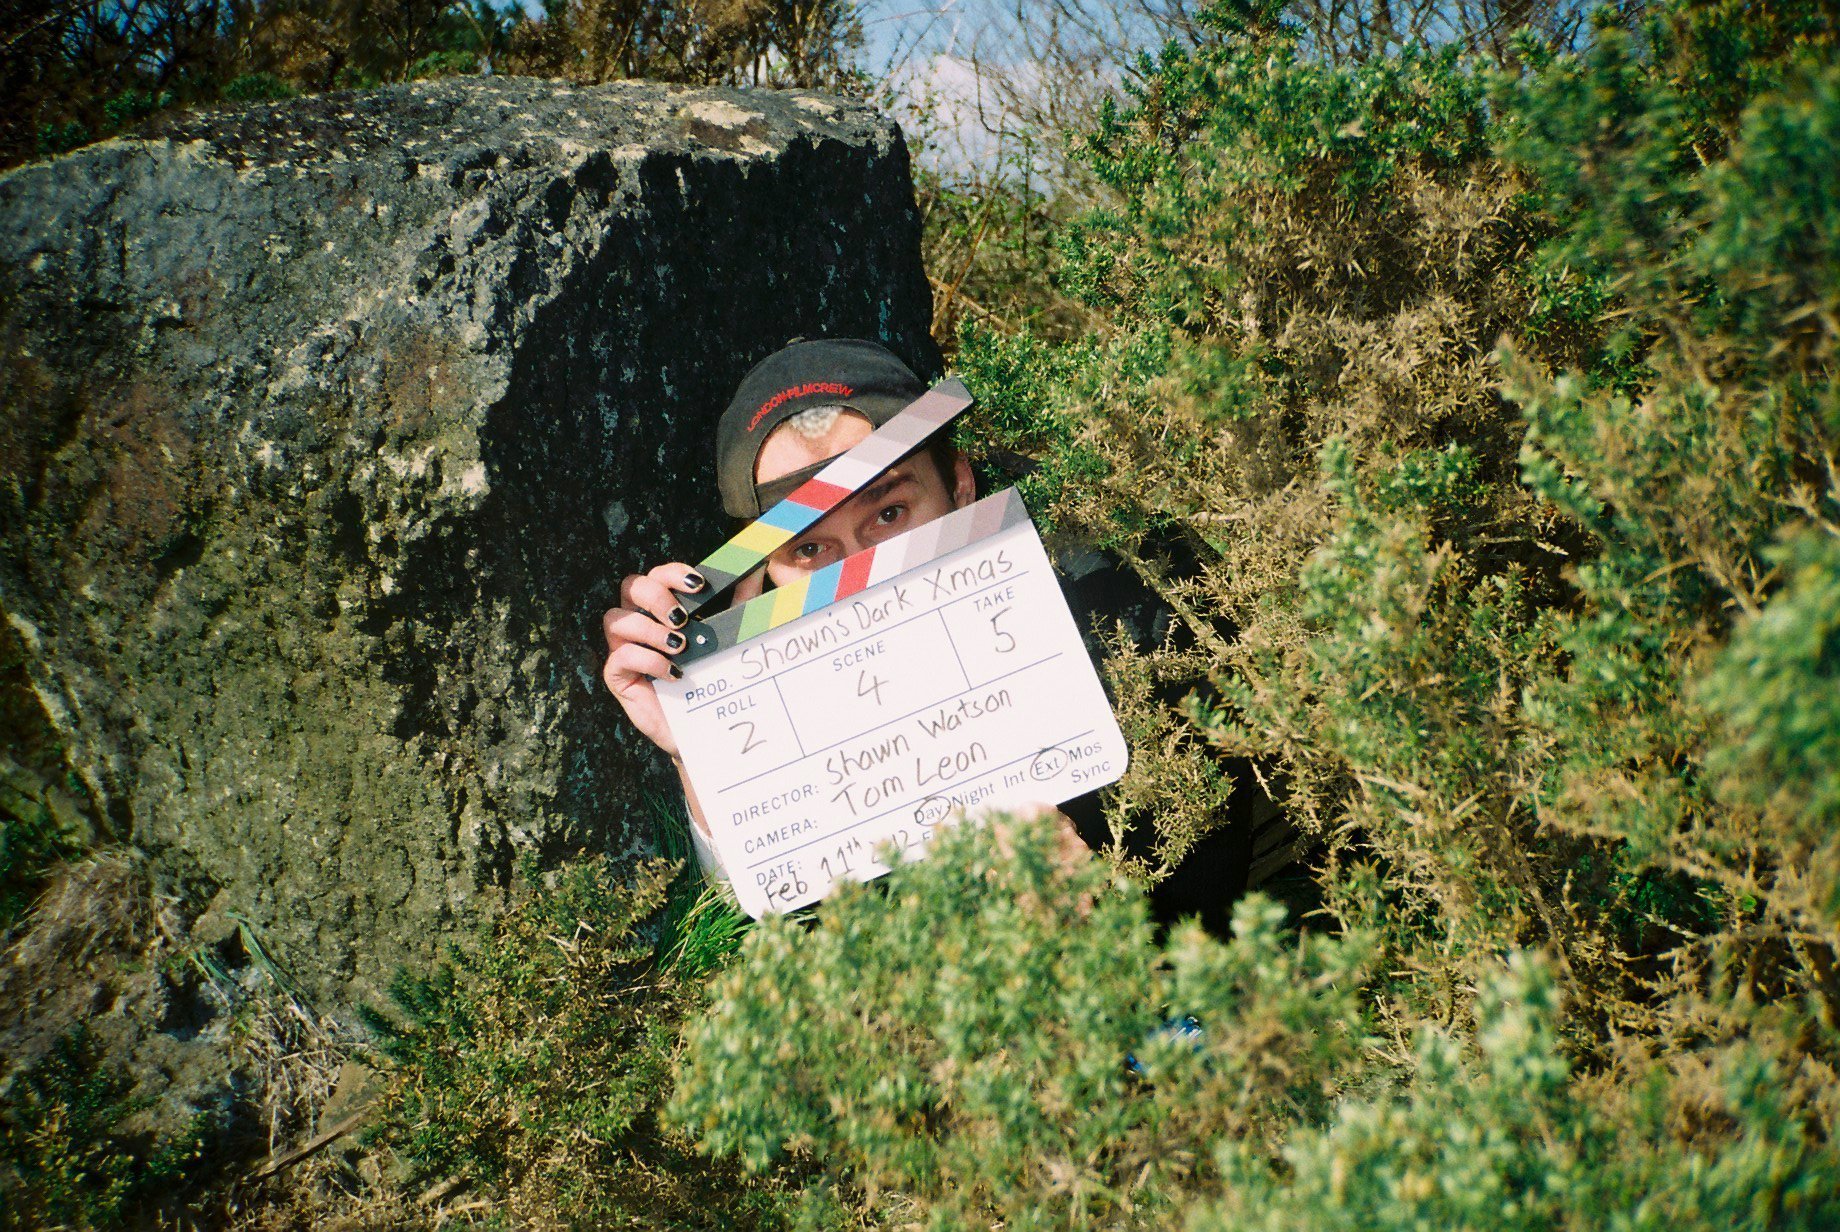 Shawn with the clapperboard on location.